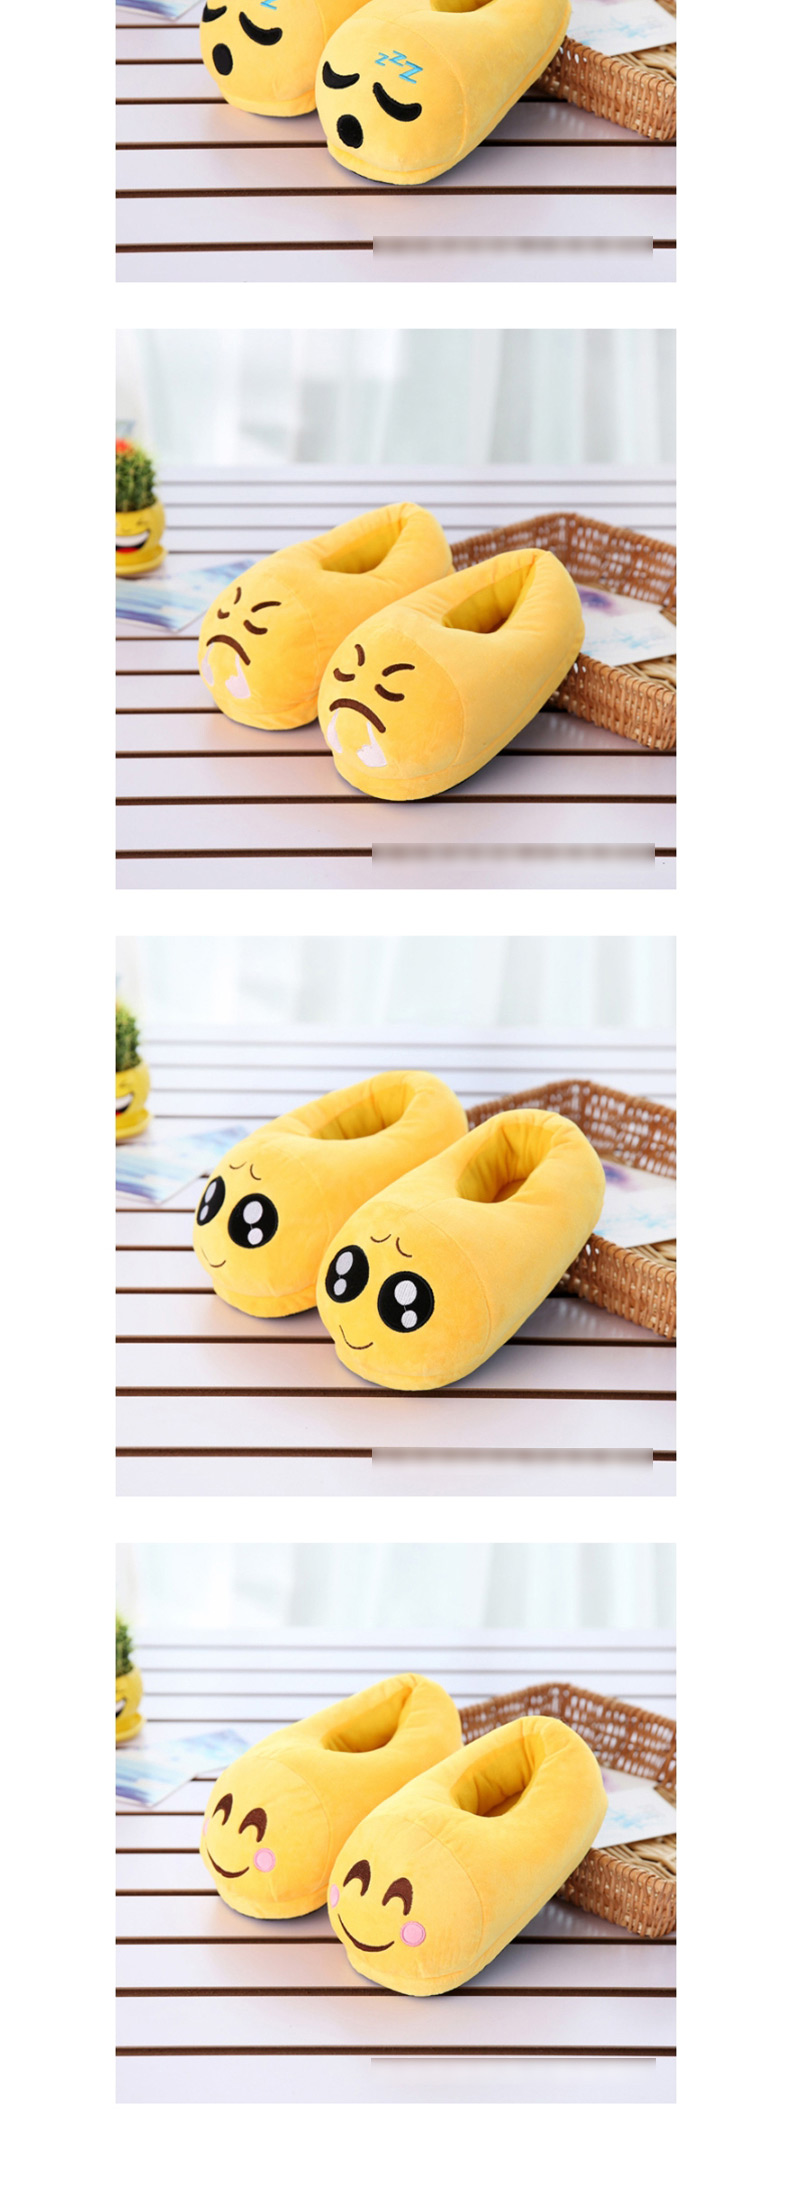 Fashion 8 Yellow Cartoon Expression Plush Bag With Cotton Slippers,Slippers